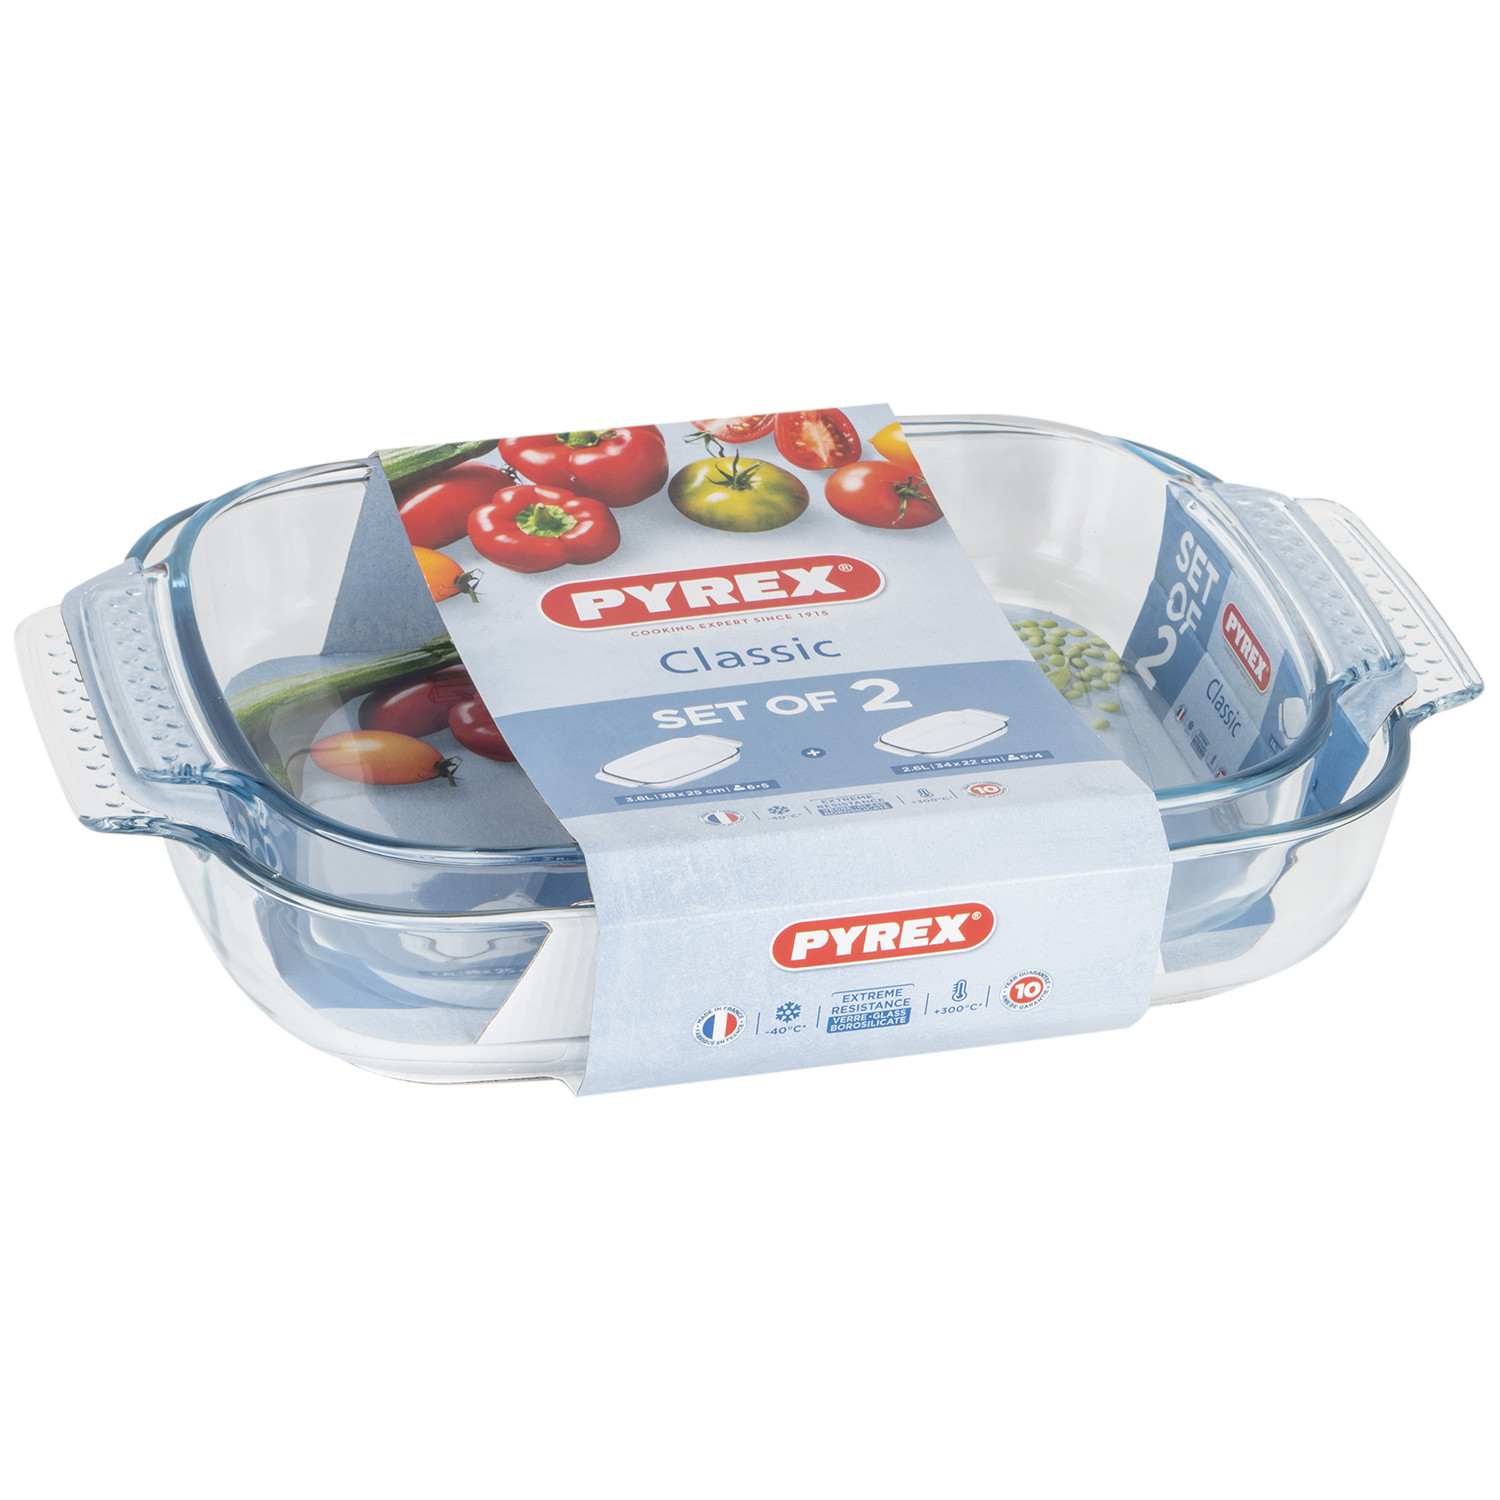 Pyrex Classic Roaster 2 Pack Image